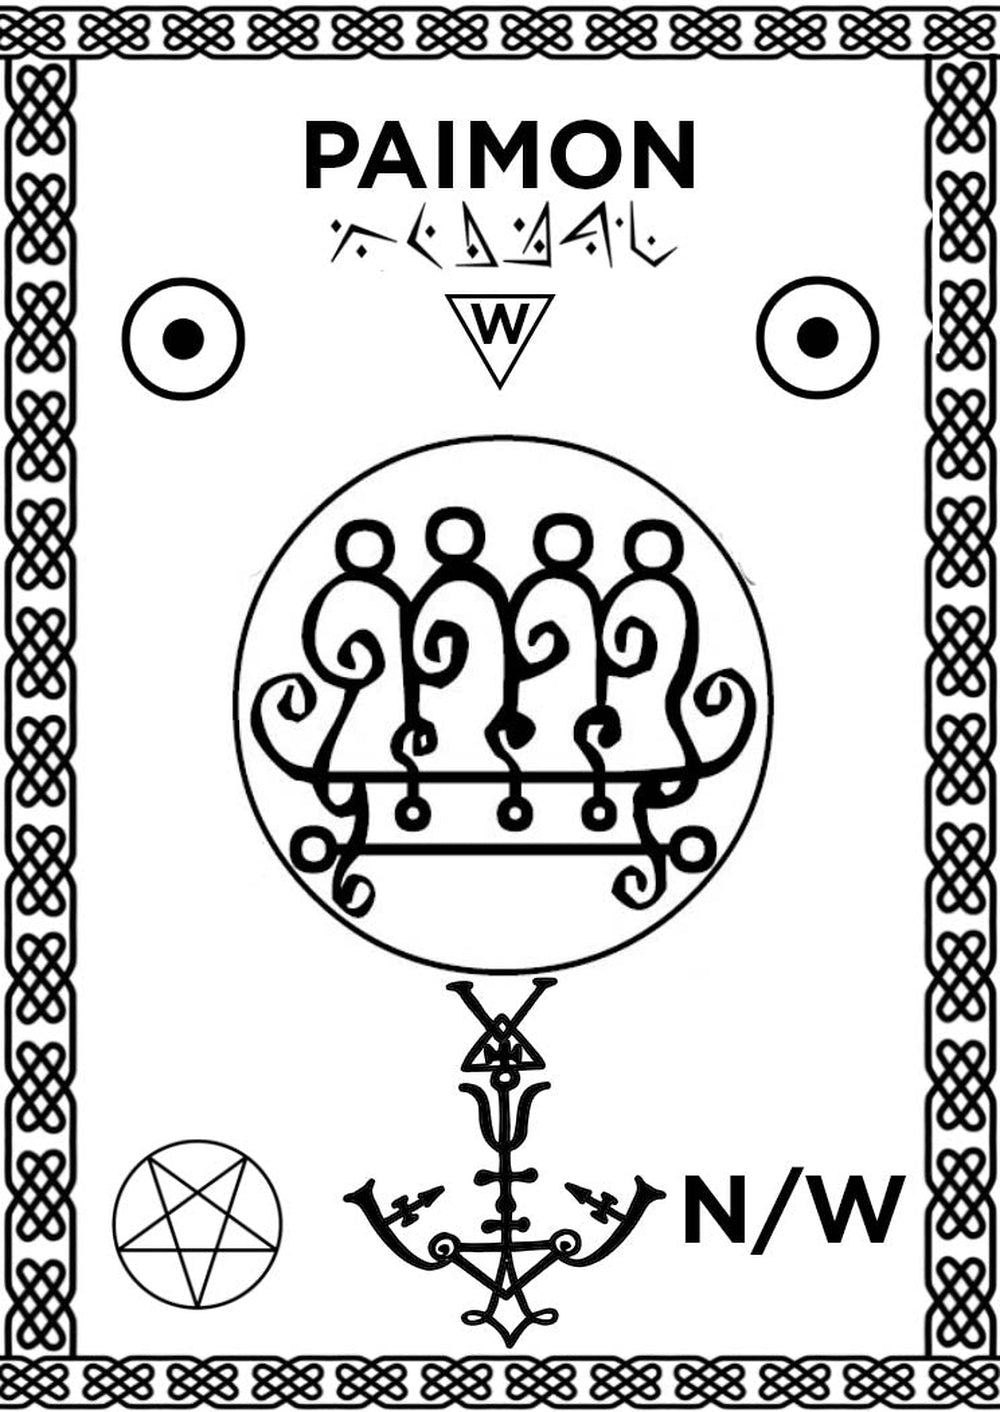 Invocation-Alignment-Pad-with-the-Sigil-of-Paimon-for-home-alttar-Witchcraft-2